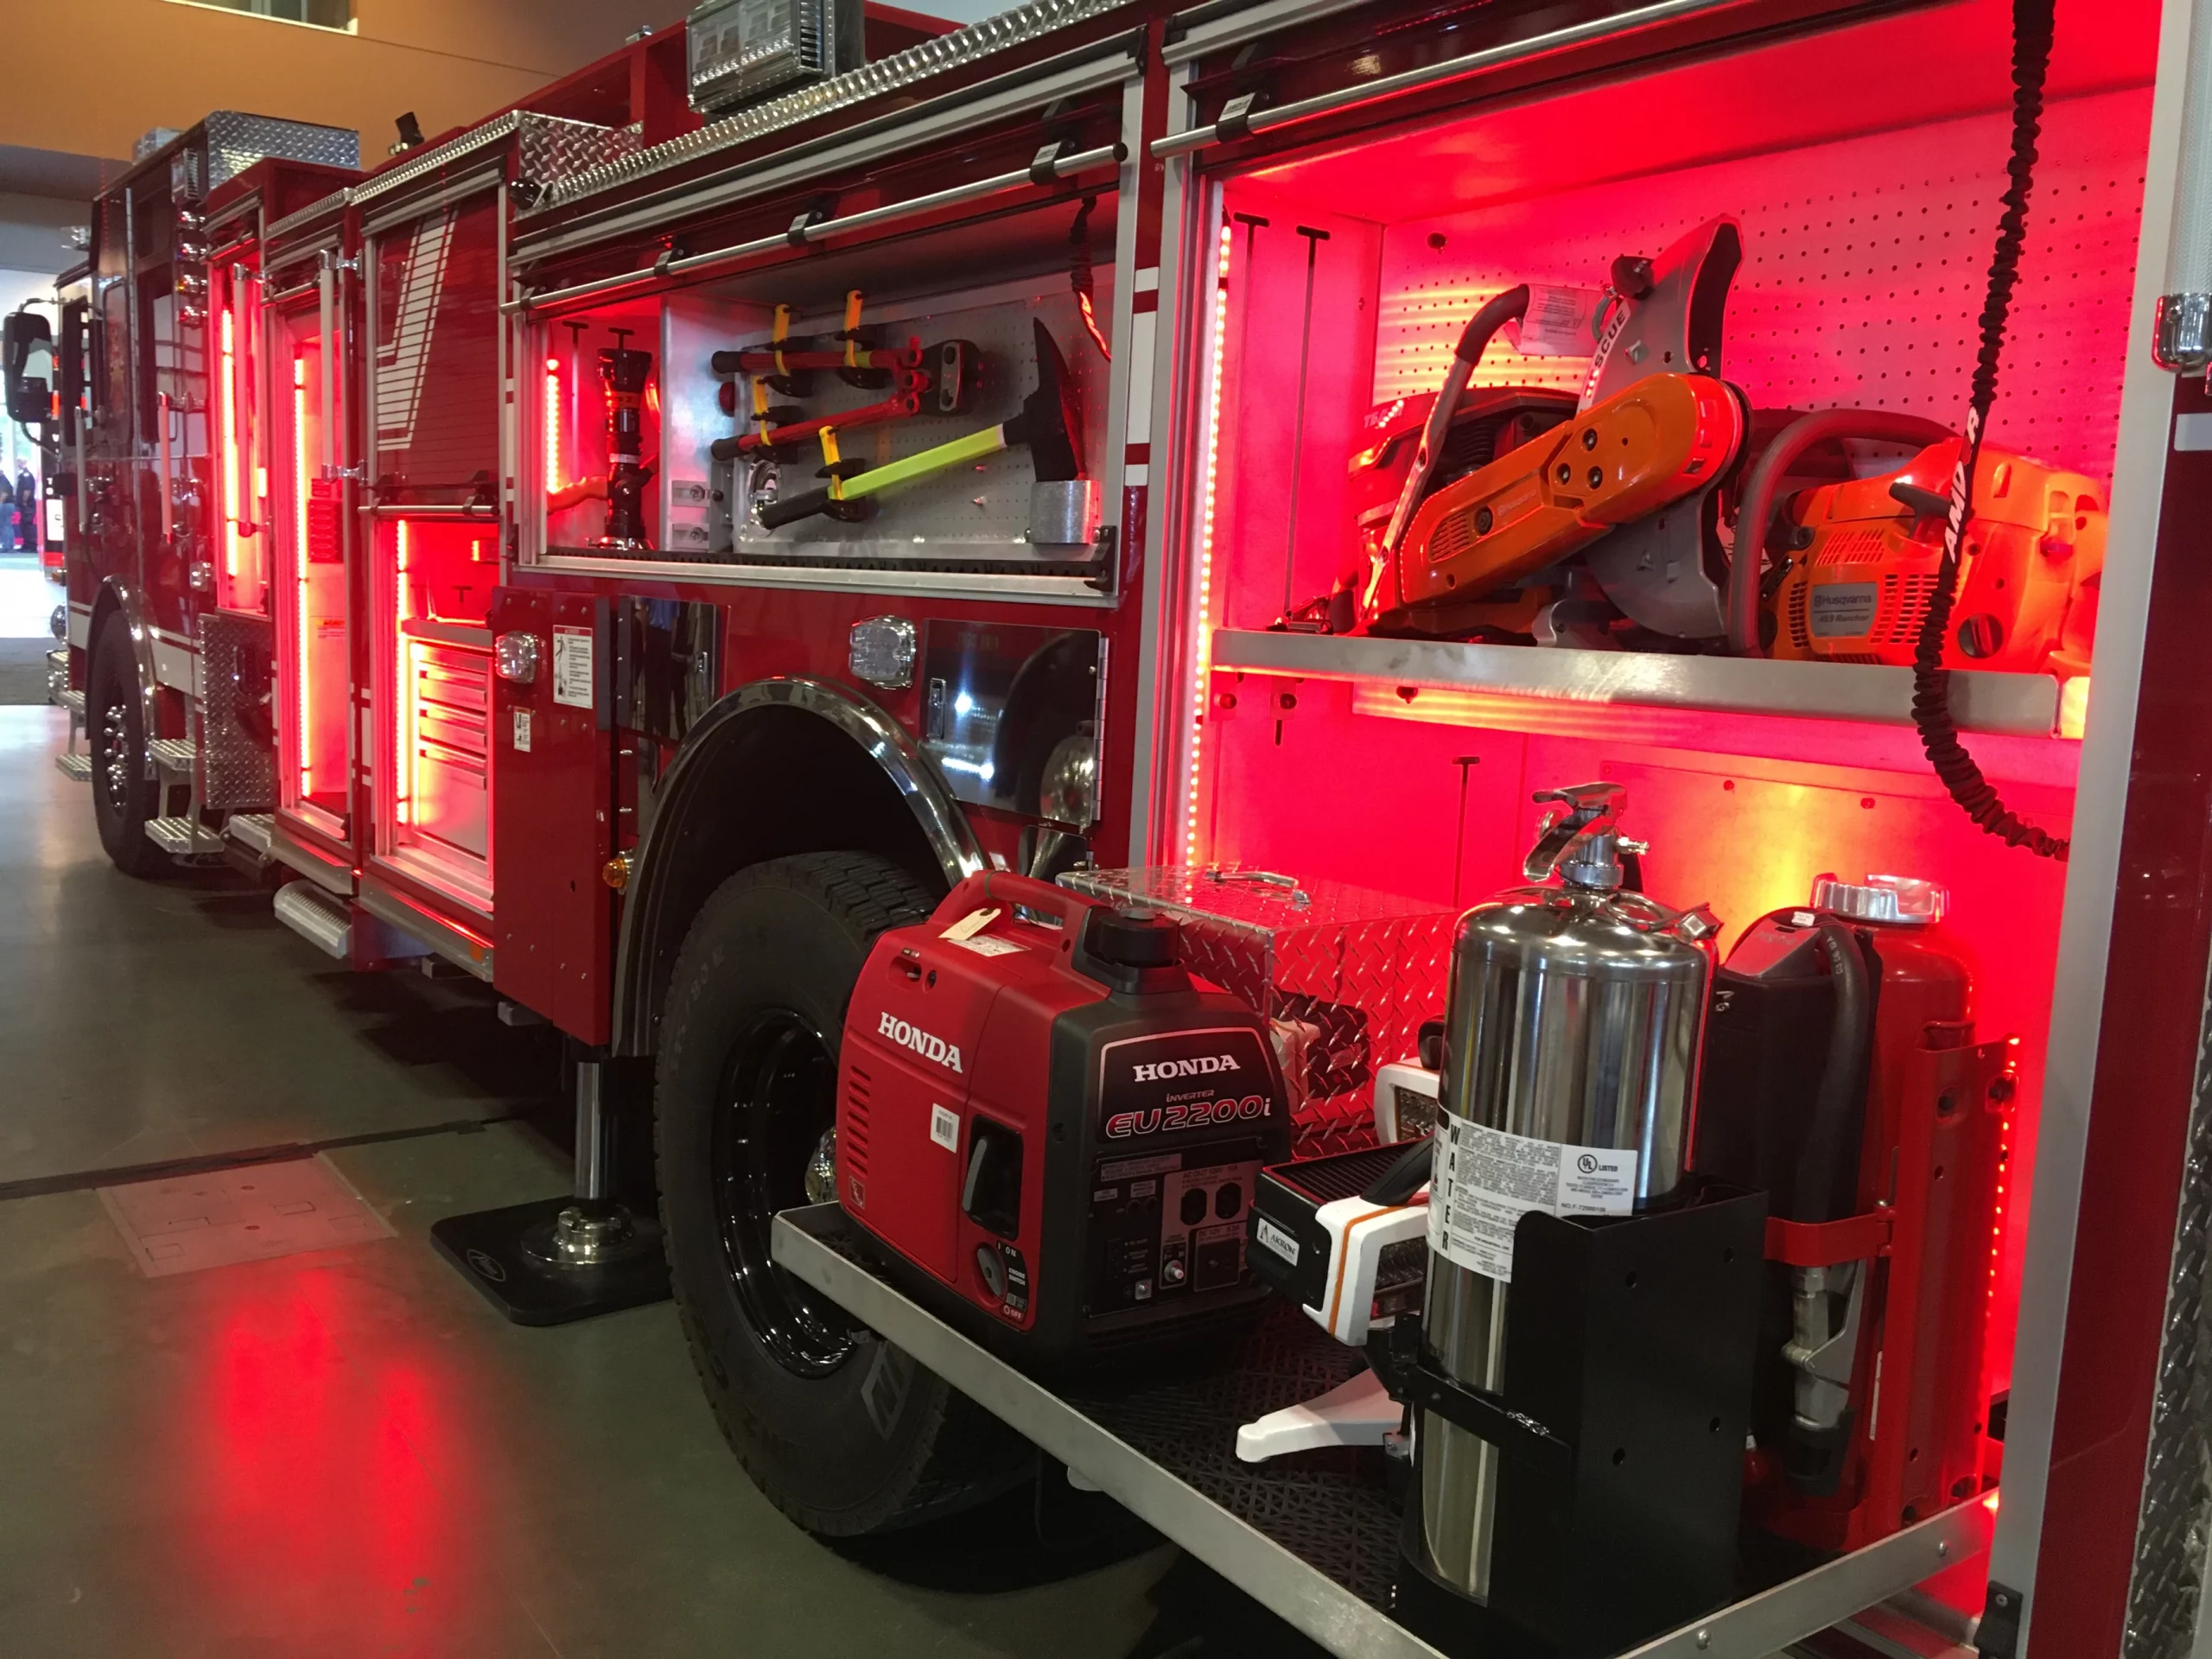 The side of a firetruck at the 2019 Firehouse Expo showcases oxygen tanks, a generator, and more.